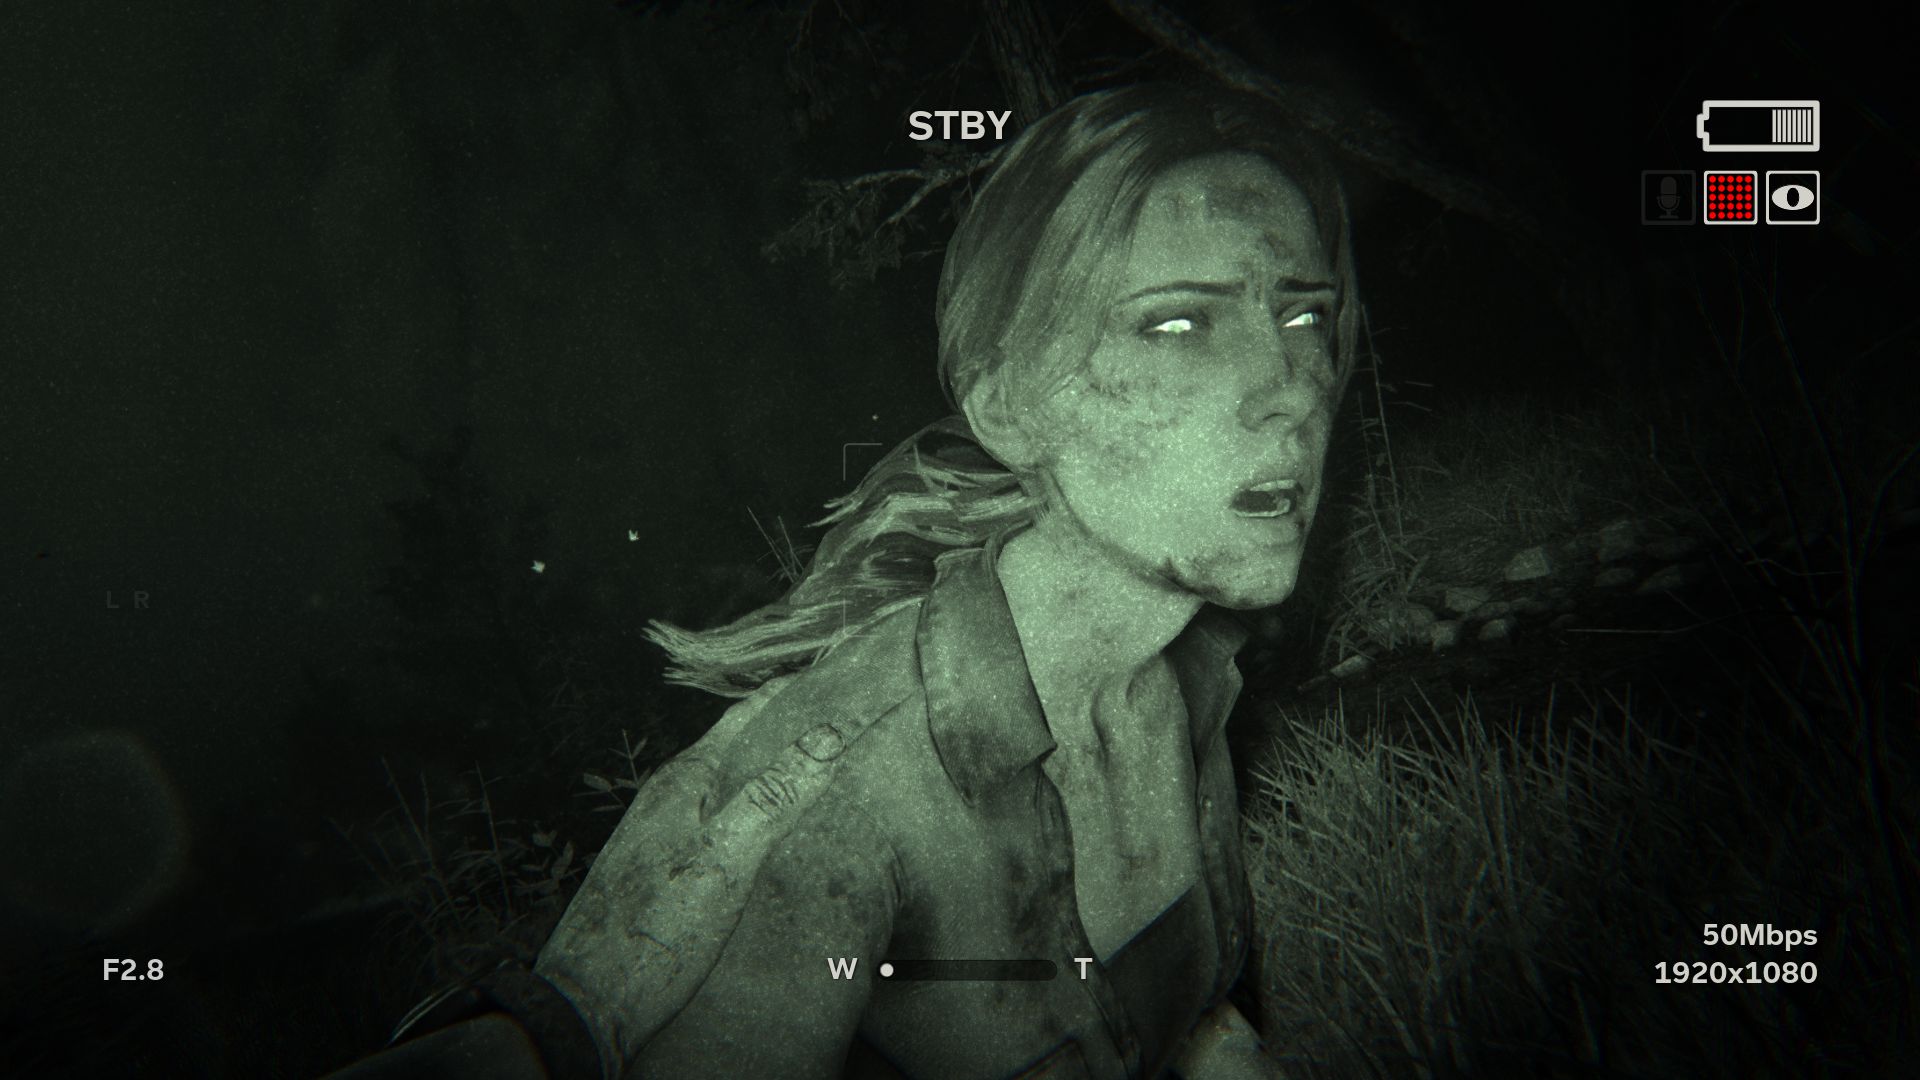 download the outlast 2